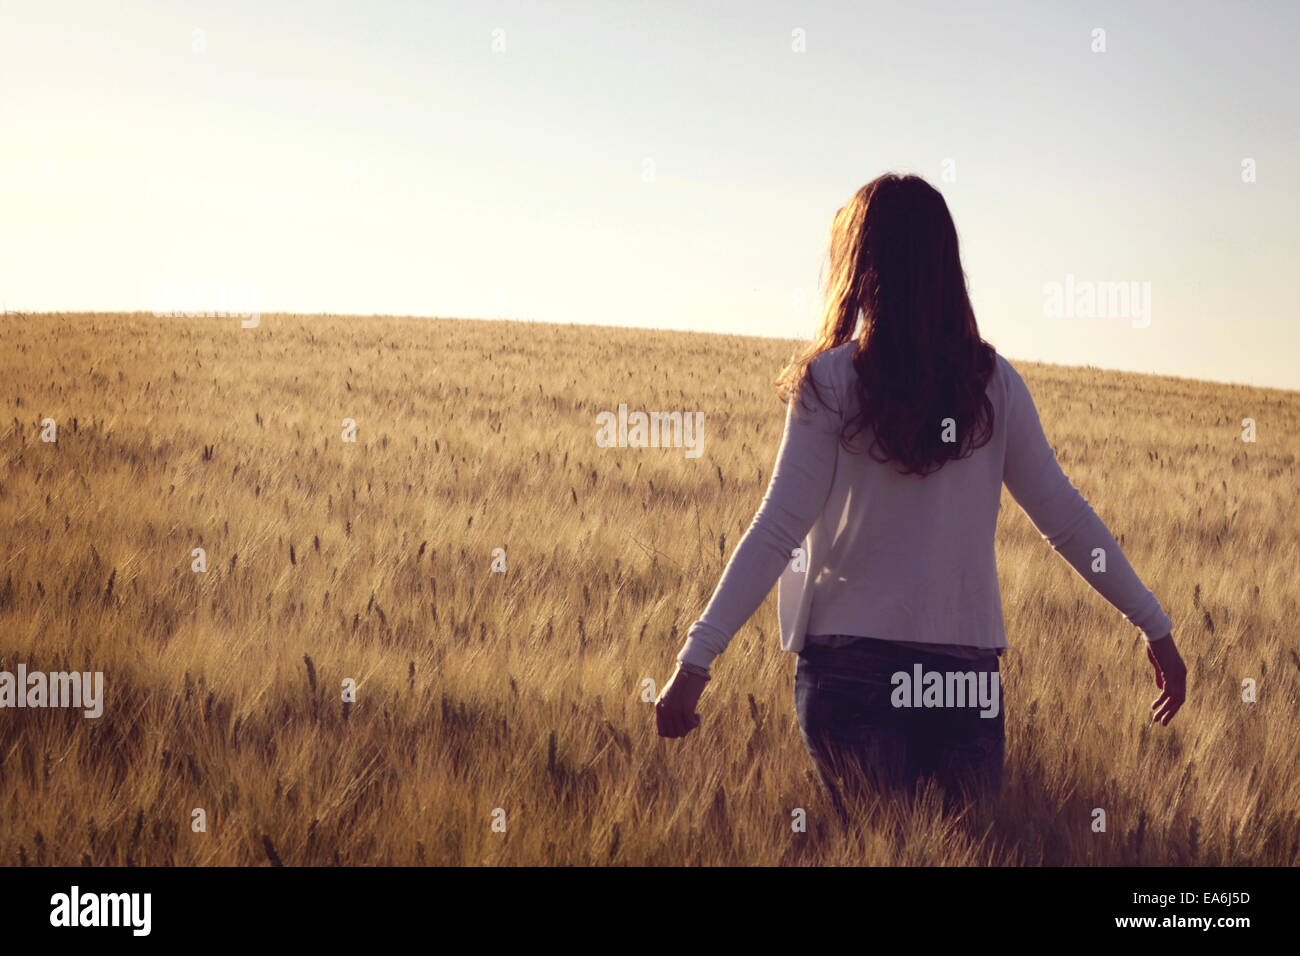 Woman standing in wheat field Stock Photo